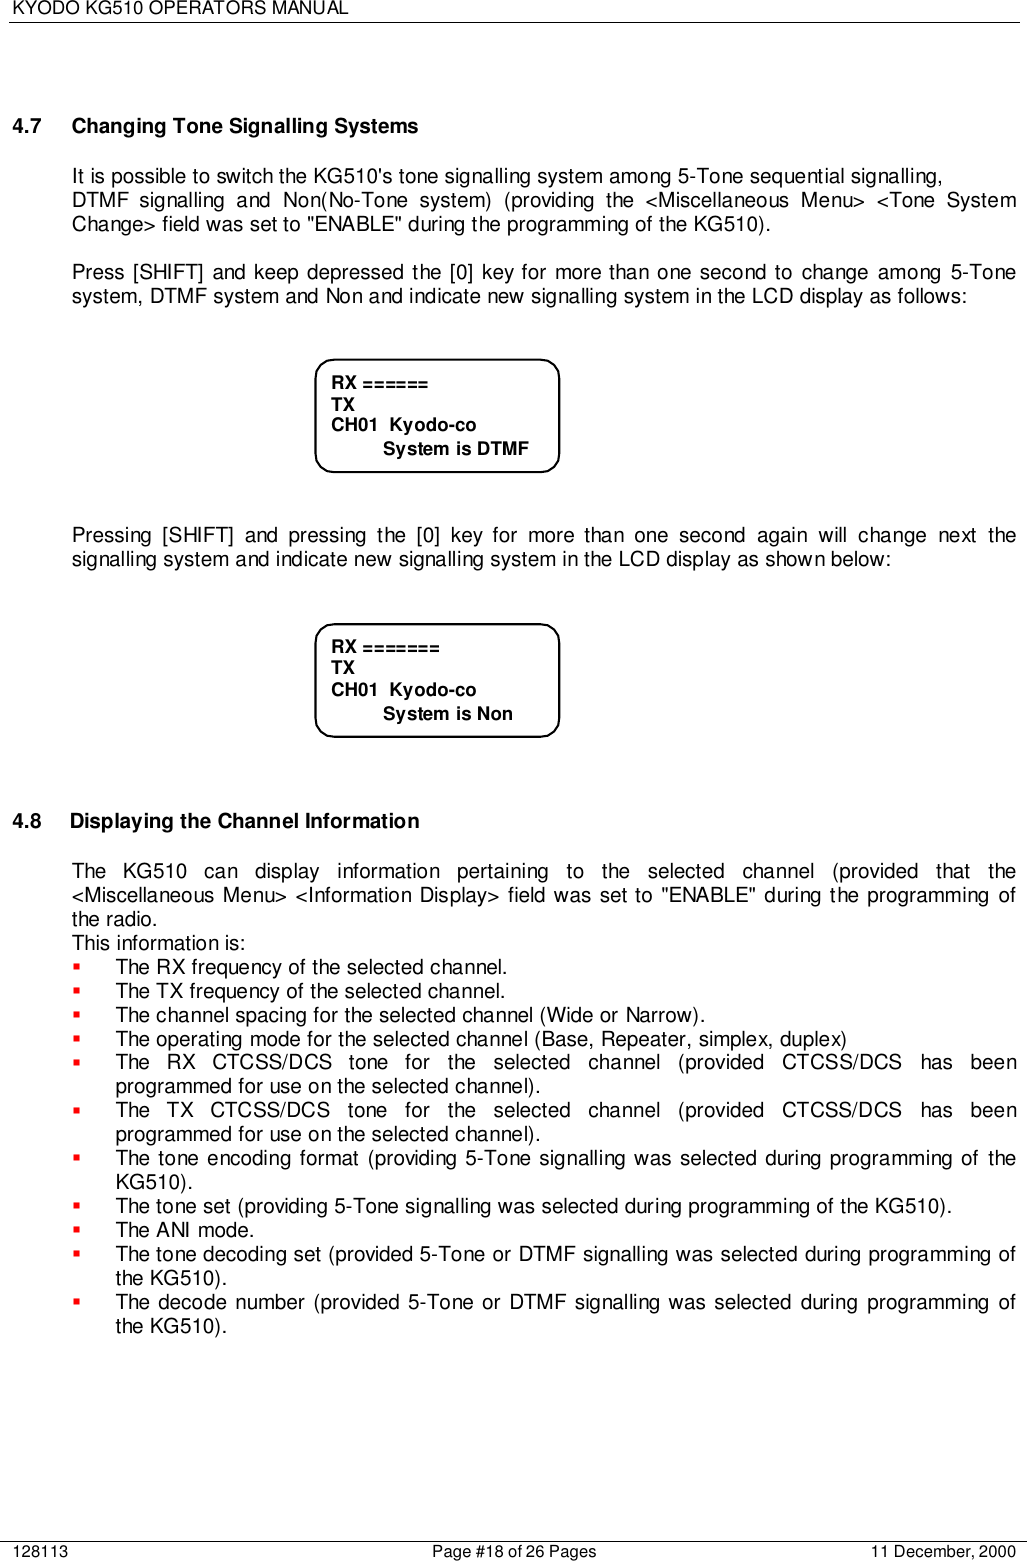 KYODO KG510 OPERATORS MANUAL128113 Page #18 of 26 Pages 11 December, 20004.7 Changing Tone Signalling SystemsIt is possible to switch the KG510&apos;s tone signalling system among 5-Tone sequential signalling,DTMF signalling and Non(No-Tone system) (providing the &lt;Miscellaneous Menu&gt; &lt;Tone SystemChange&gt; field was set to &quot;ENABLE&quot; during the programming of the KG510).Press [SHIFT] and keep depressed the [0] key for more than one second to change among 5-Tonesystem, DTMF system and Non and indicate new signalling system in the LCD display as follows:Pressing [SHIFT] and pressing the [0] key for more than one second again will change next thesignalling system and indicate new signalling system in the LCD display as shown below:4.8  Displaying the Channel InformationThe KG510 can display information pertaining to the selected channel (provided that the&lt;Miscellaneous Menu&gt; &lt;Information Display&gt; field was set to &quot;ENABLE&quot; during the programming ofthe radio.This information is:! The RX frequency of the selected channel.! The TX frequency of the selected channel.! The channel spacing for the selected channel (Wide or Narrow).! The operating mode for the selected channel (Base, Repeater, simplex, duplex)! The RX CTCSS/DCS tone for the selected channel (provided CTCSS/DCS has beenprogrammed for use on the selected channel).! The TX CTCSS/DCS tone for the selected channel (provided CTCSS/DCS has beenprogrammed for use on the selected channel).! The tone encoding format (providing 5-Tone signalling was selected during programming of theKG510).! The tone set (providing 5-Tone signalling was selected during programming of the KG510).! The ANI mode.! The tone decoding set (provided 5-Tone or DTMF signalling was selected during programming ofthe KG510).! The decode number (provided 5-Tone or DTMF signalling was selected during programming ofthe KG510).RX =======TXCH01  Kyodo-co          System is NonRX ======TXCH01  Kyodo-co          System is DTMF